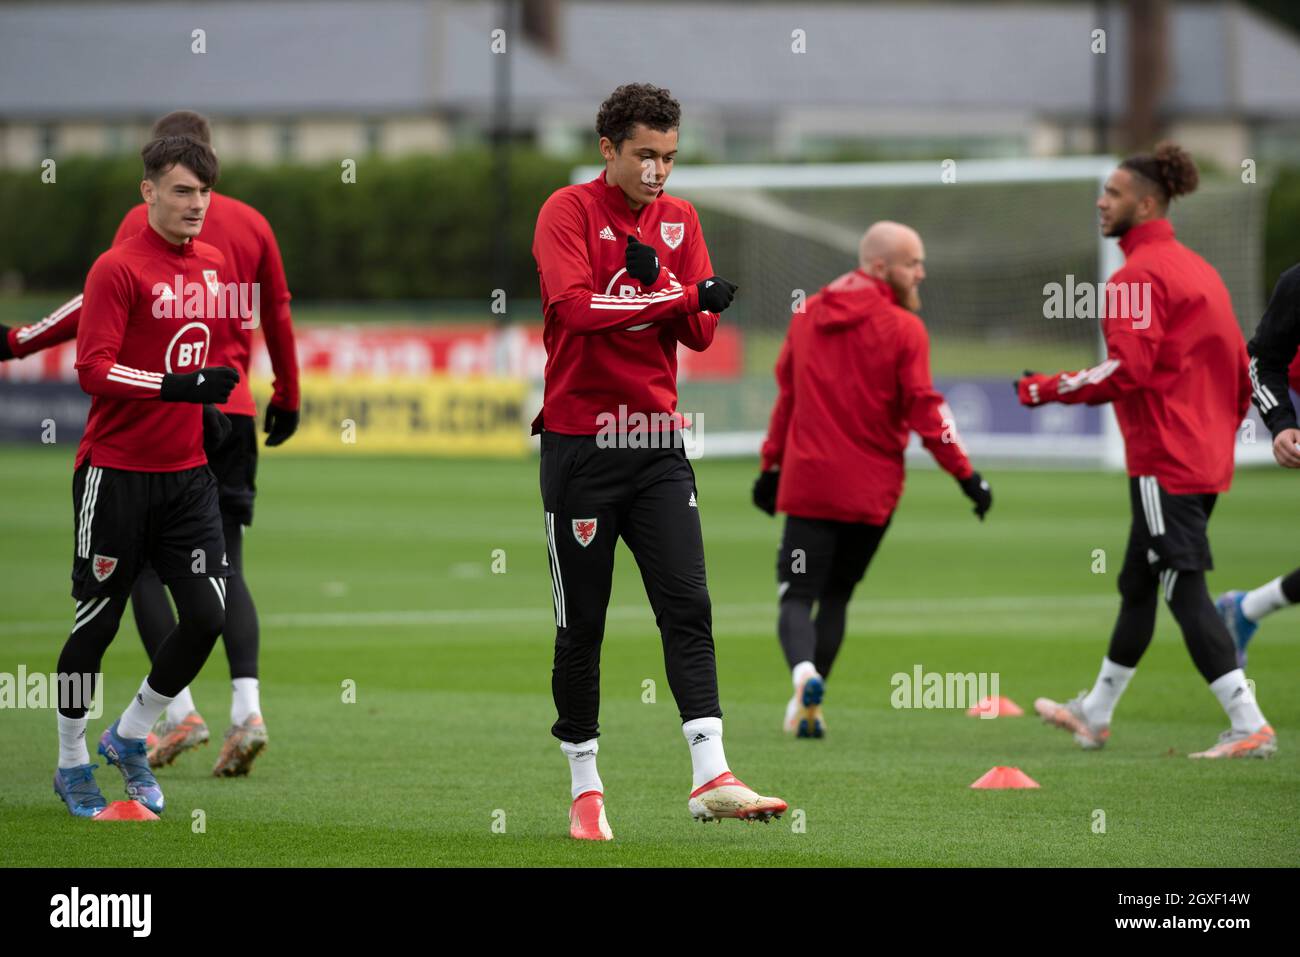 2021-10-05, Wales Football Training Session, Vale of Glamorgan (Credit Pic: Andrew Dowling) Credit: Andrew Dowling/Alamy Live News Stockfoto